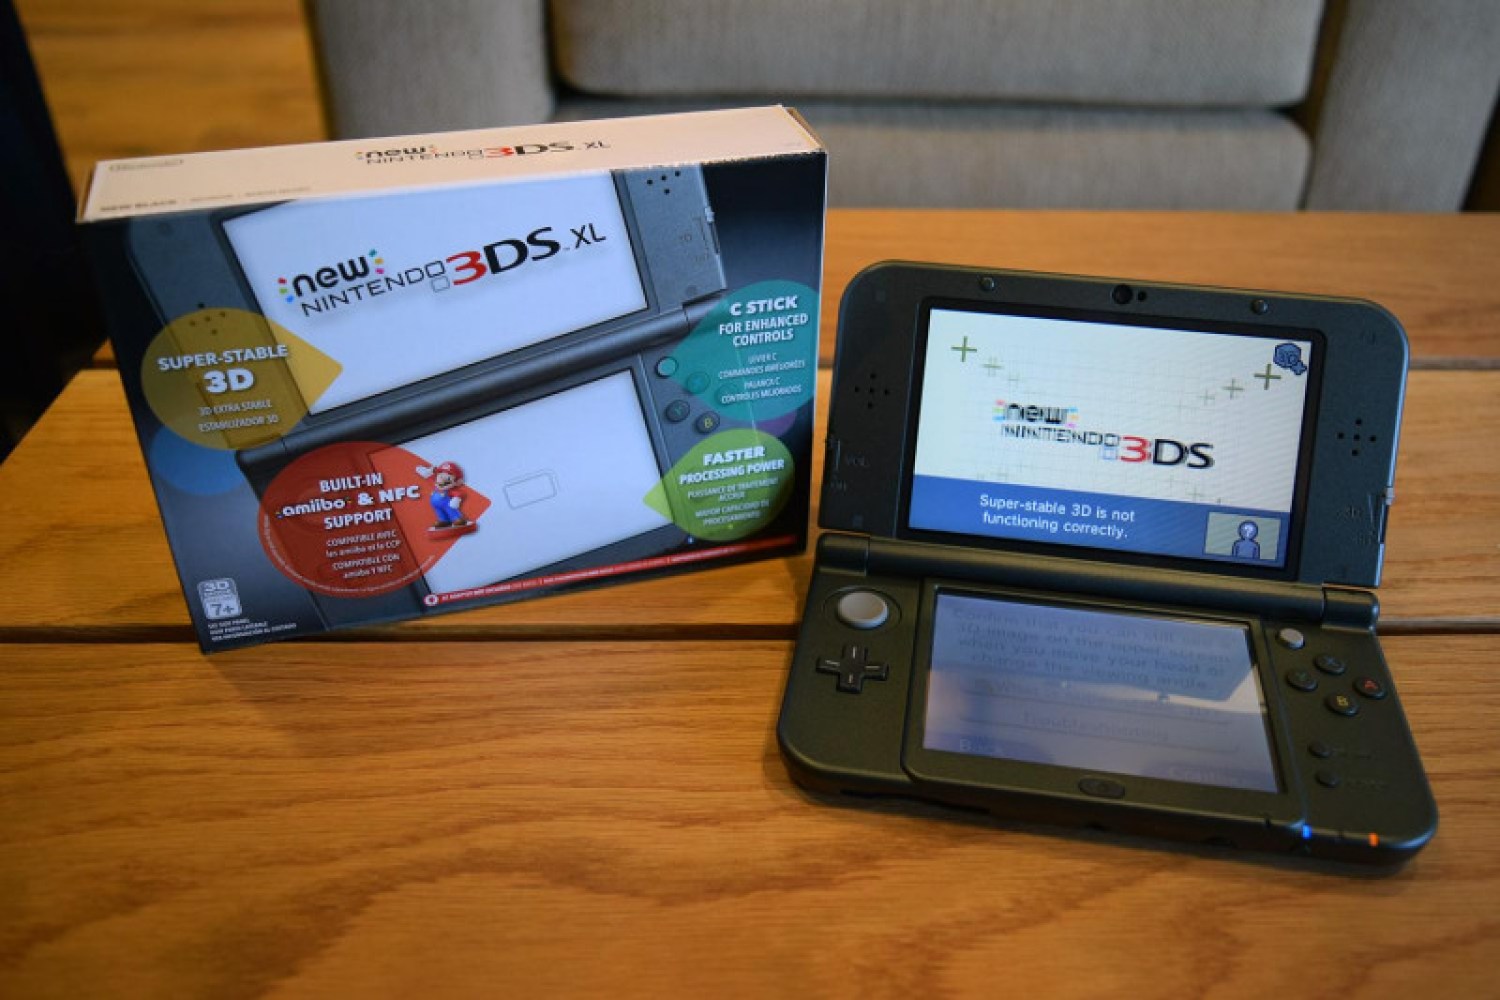 Nintendo DSi XL vs Nintendo Switch: What is the difference?